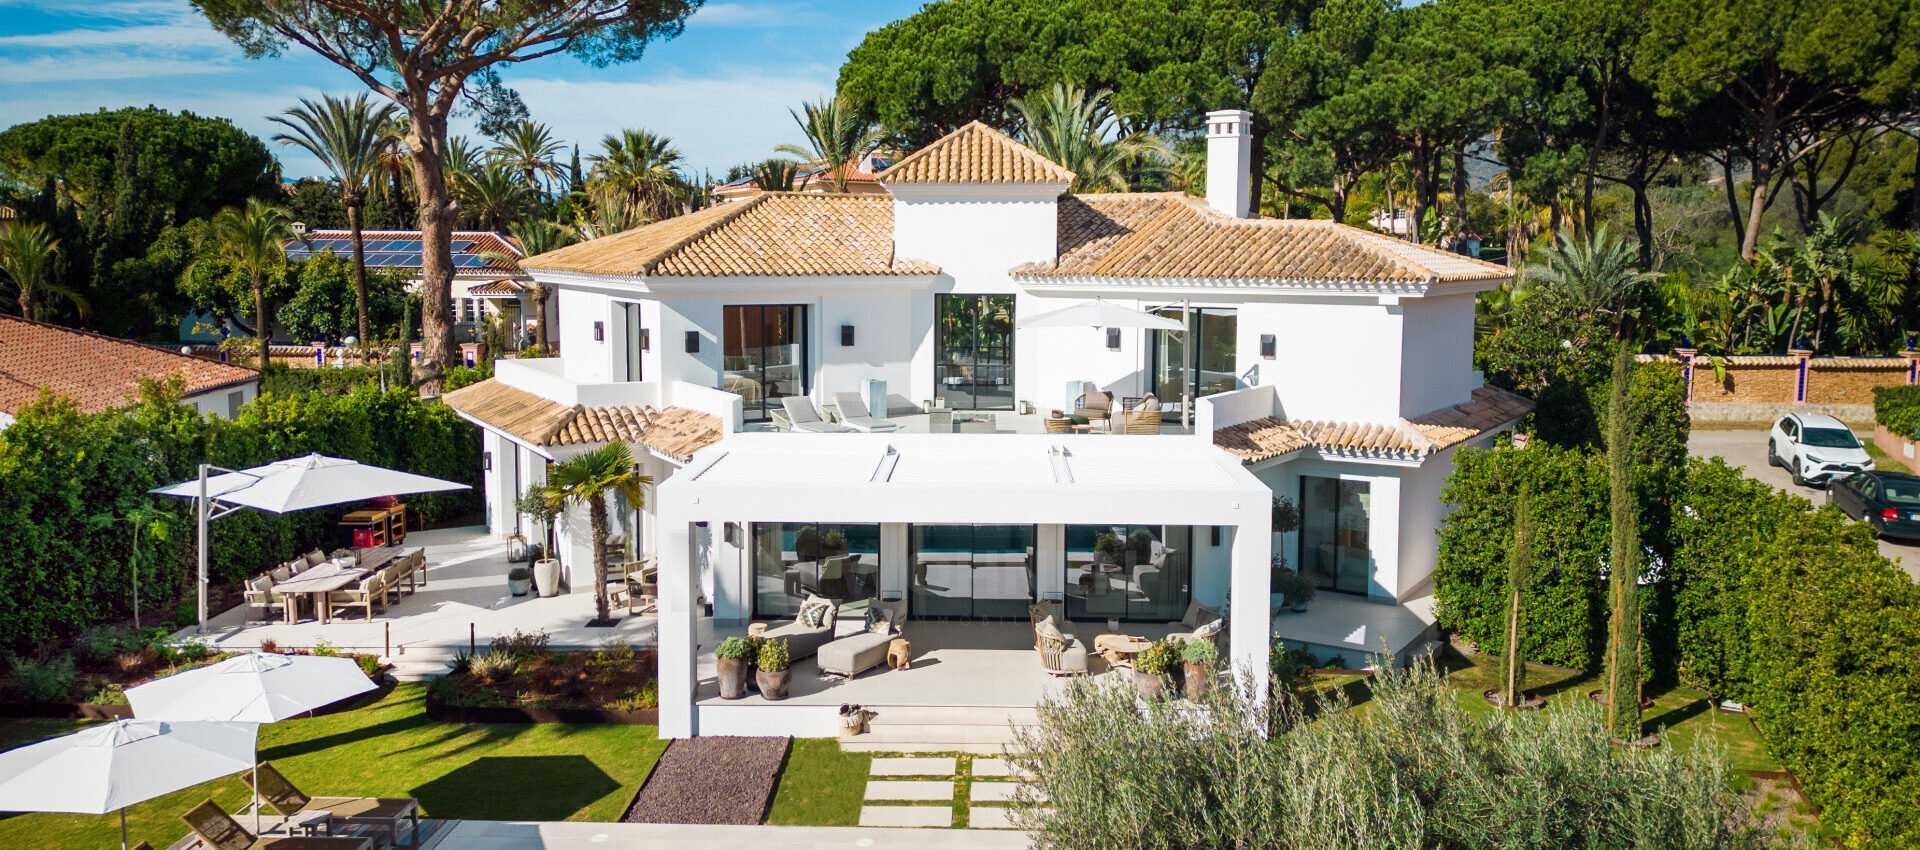 Andalusian style villa located only 300m away from the beach in Reserva de Los Monteros